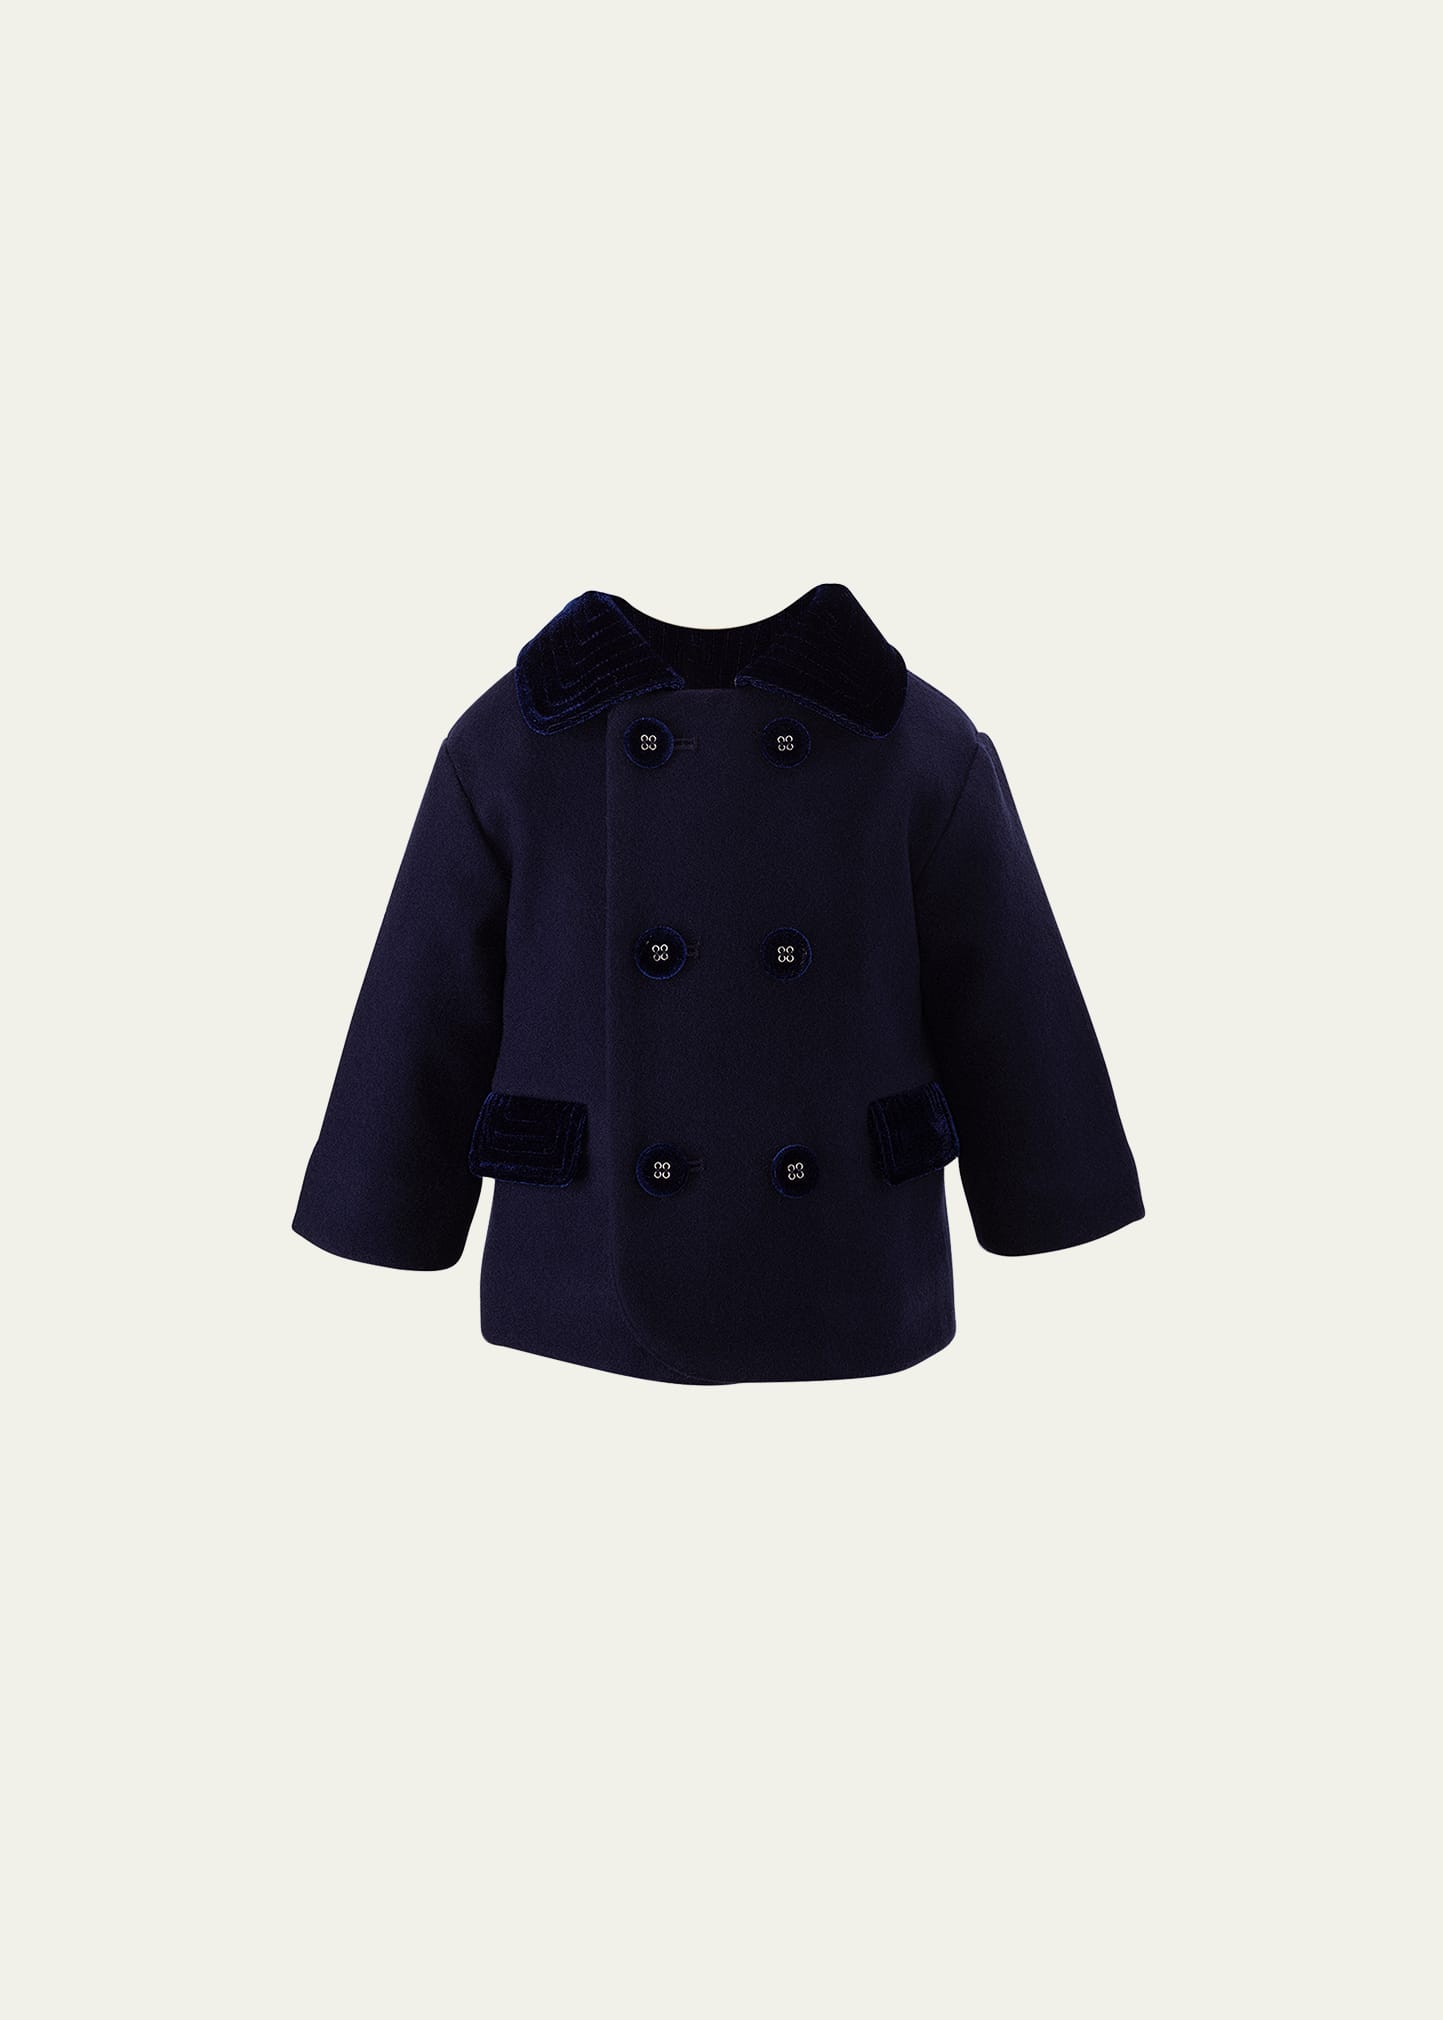 Boy's Double Breasted Coat, Size 6M-24M